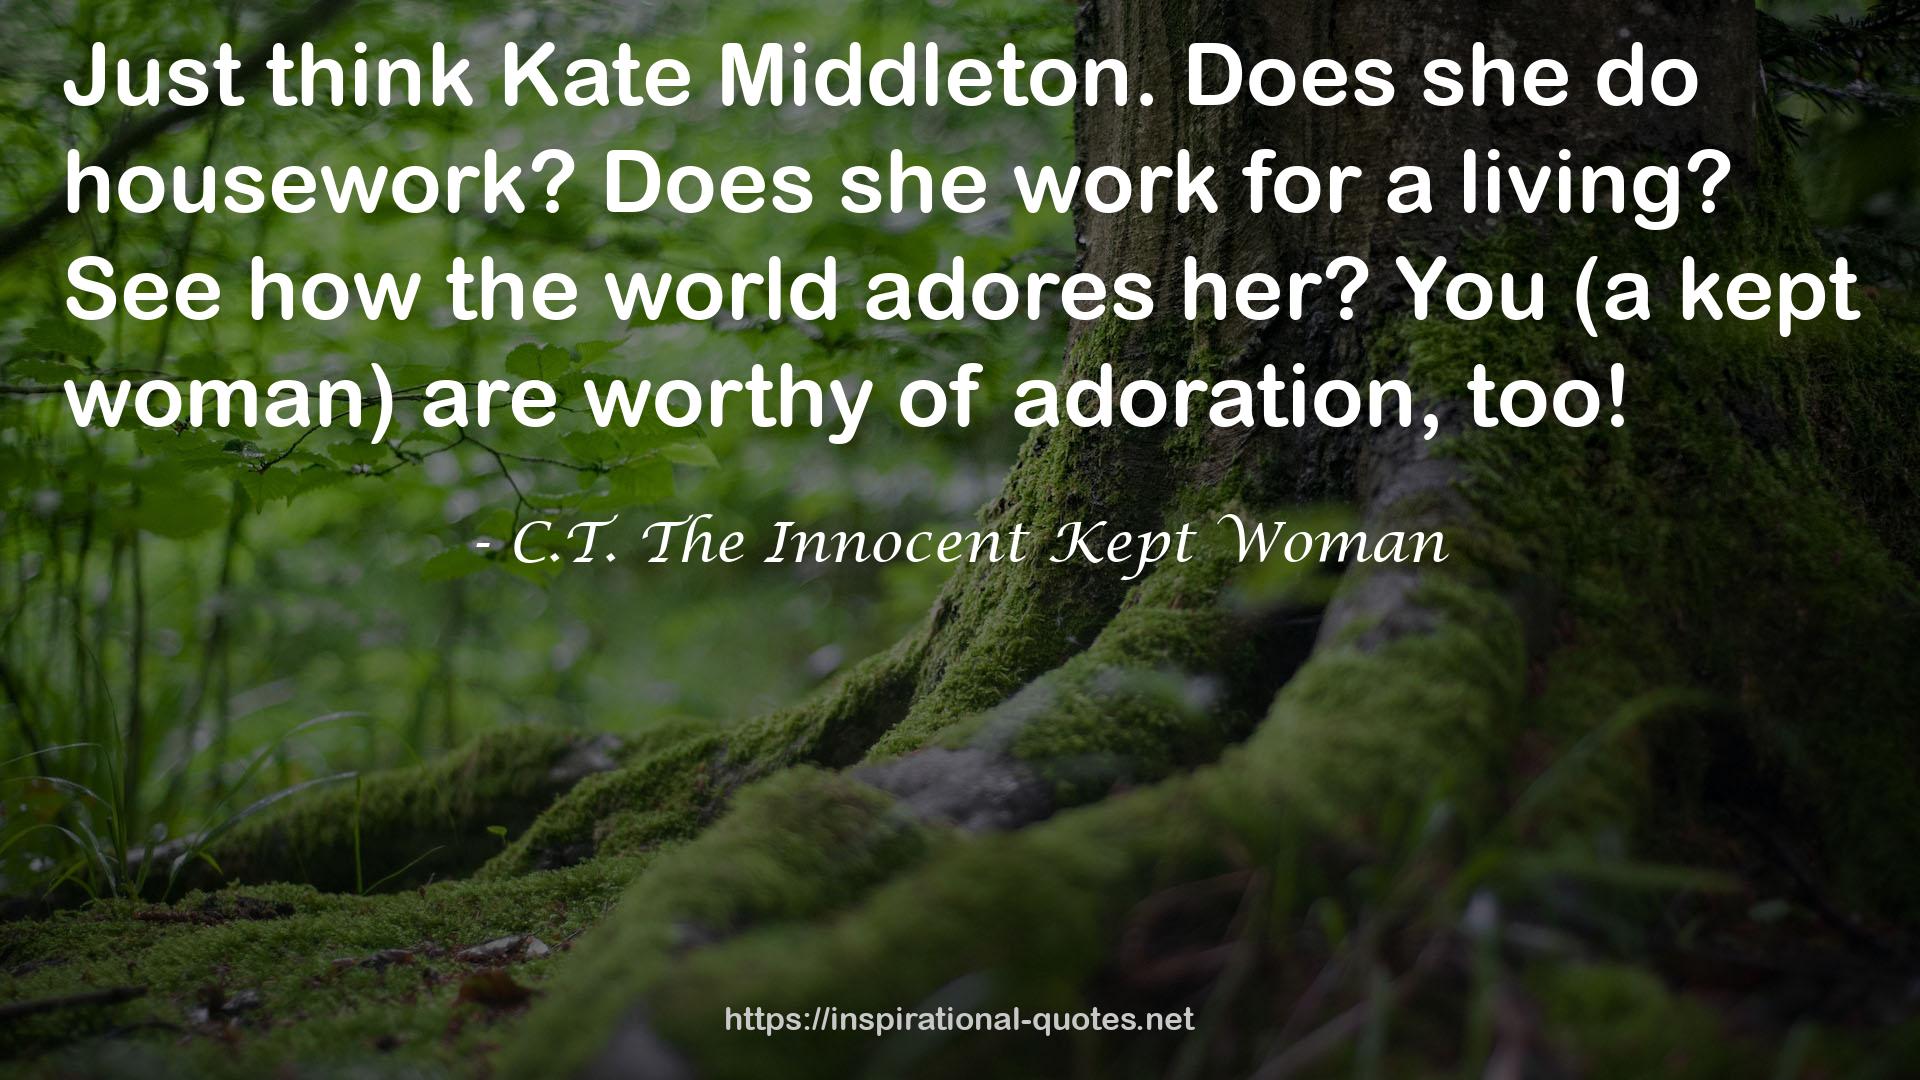 C.T. The Innocent Kept Woman QUOTES